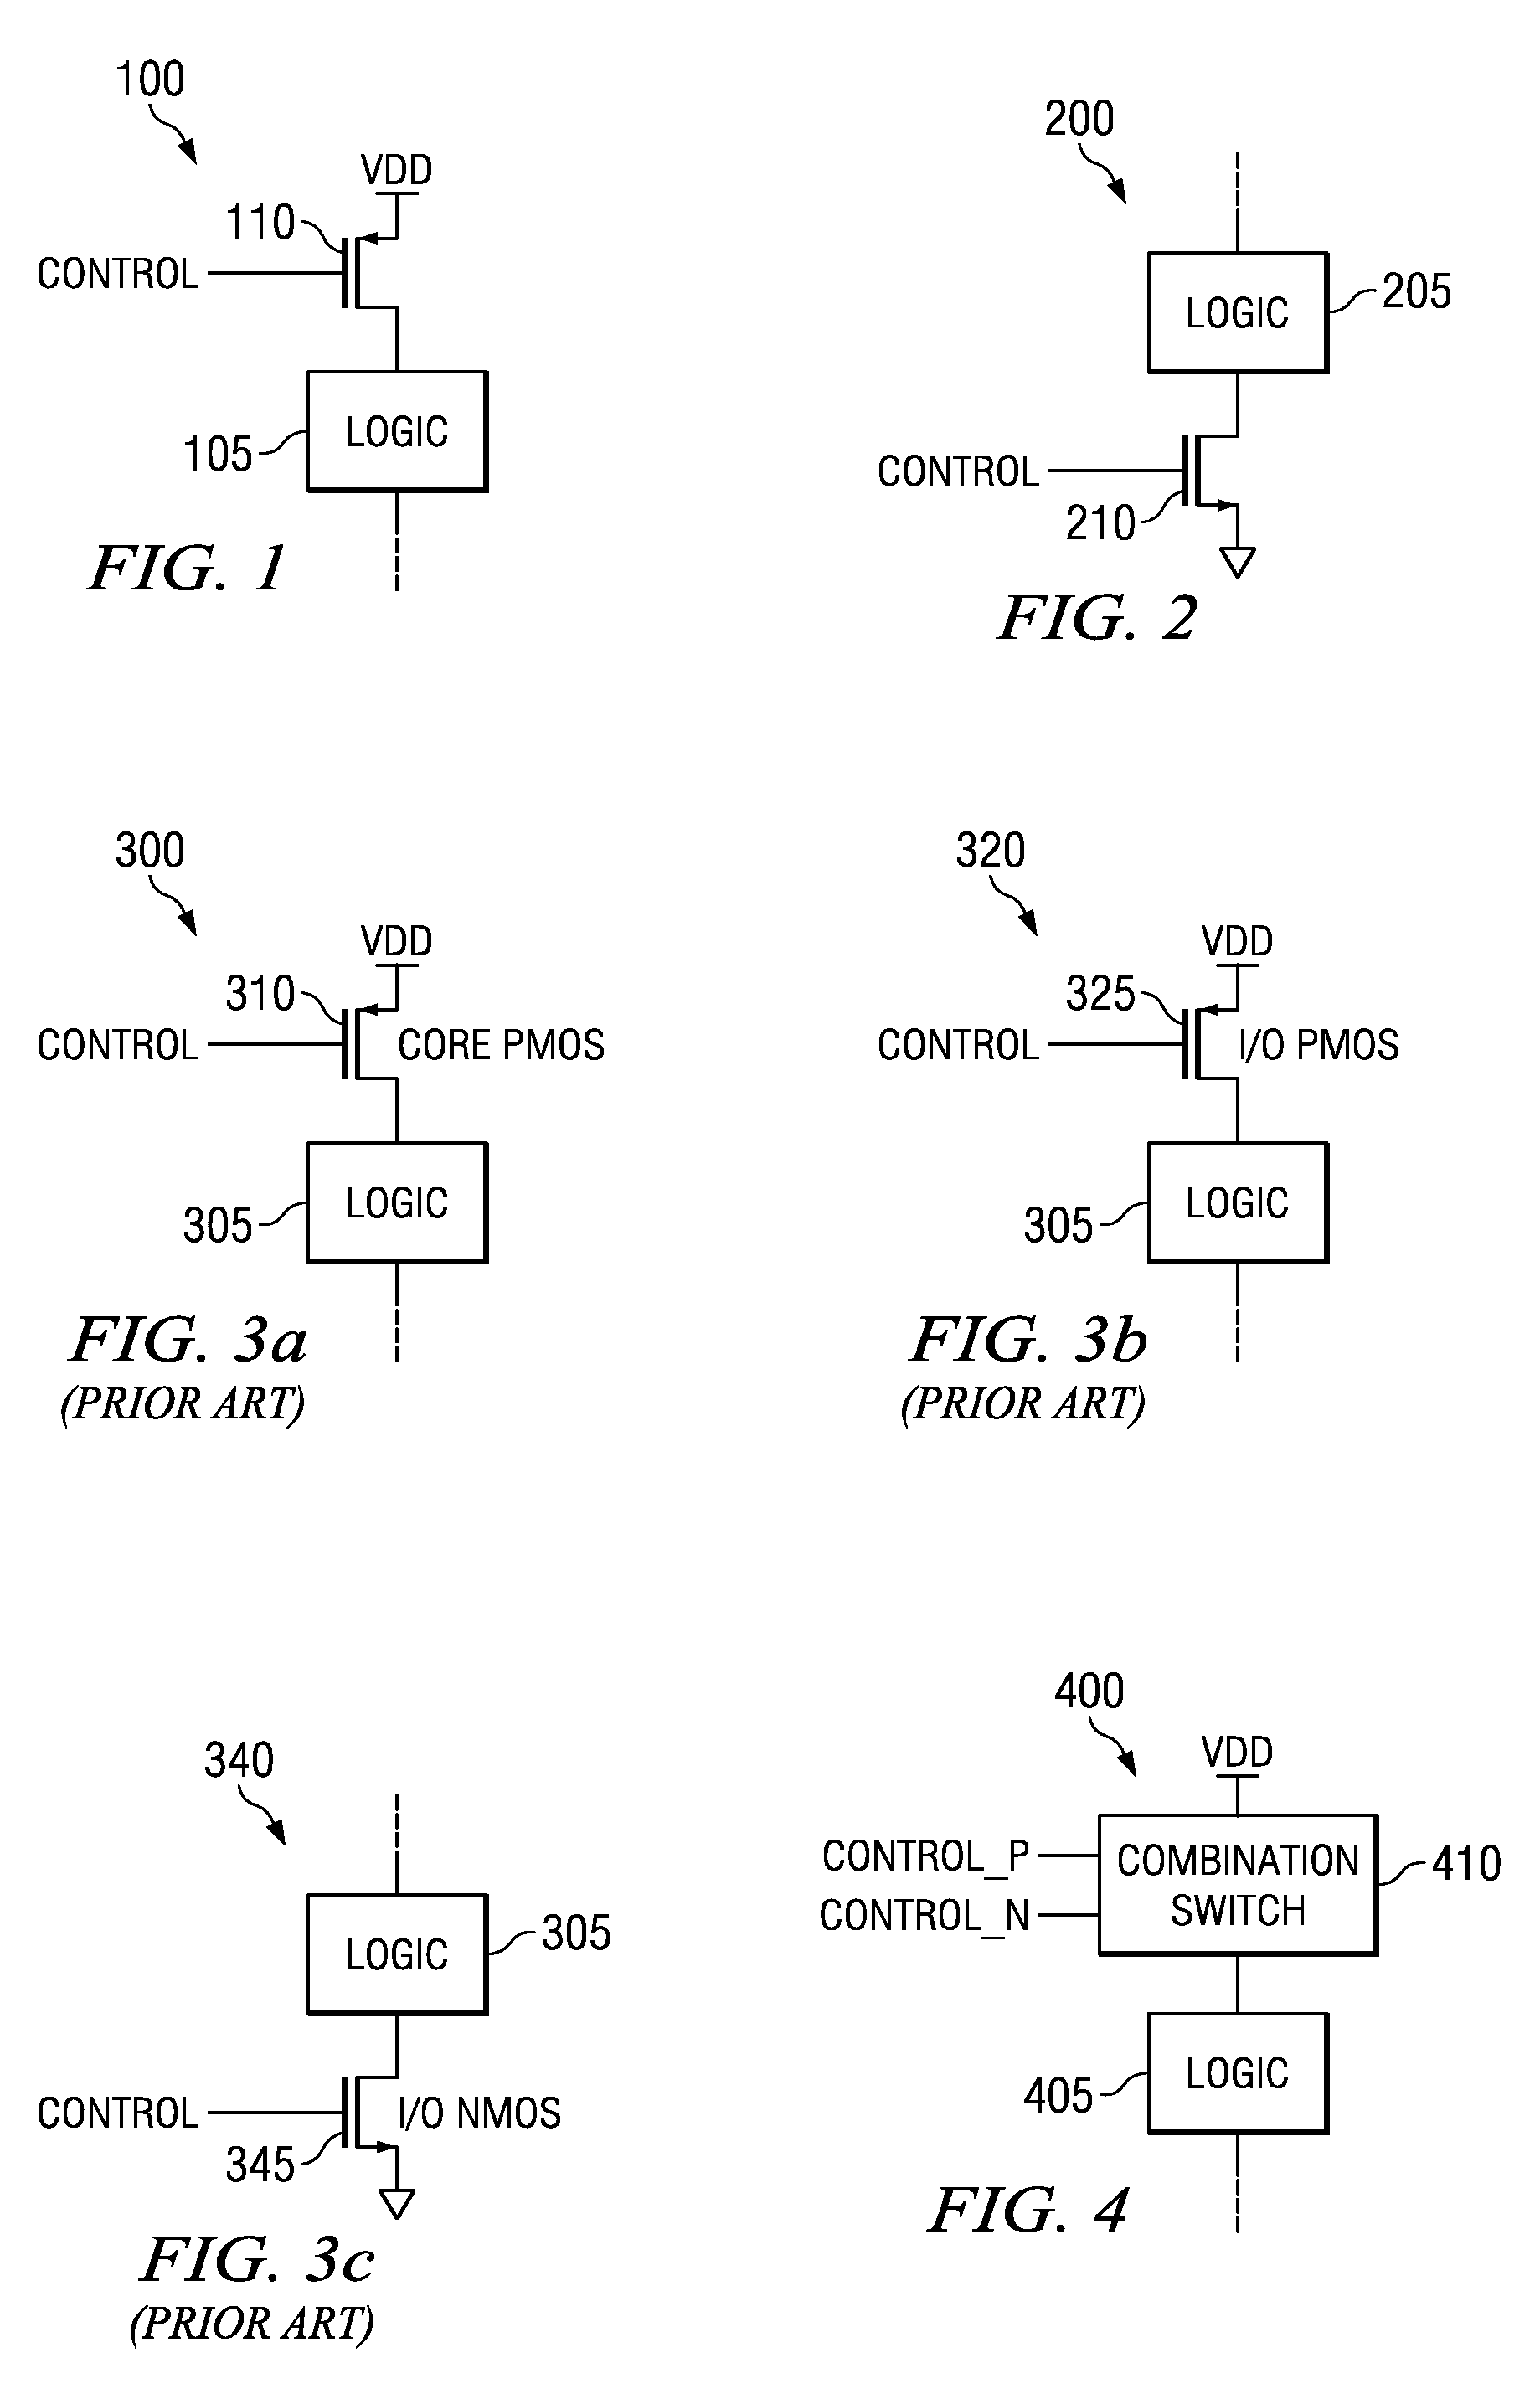 Integrated header switch with low-leakage PMOS and high-leakage NMOS transistors